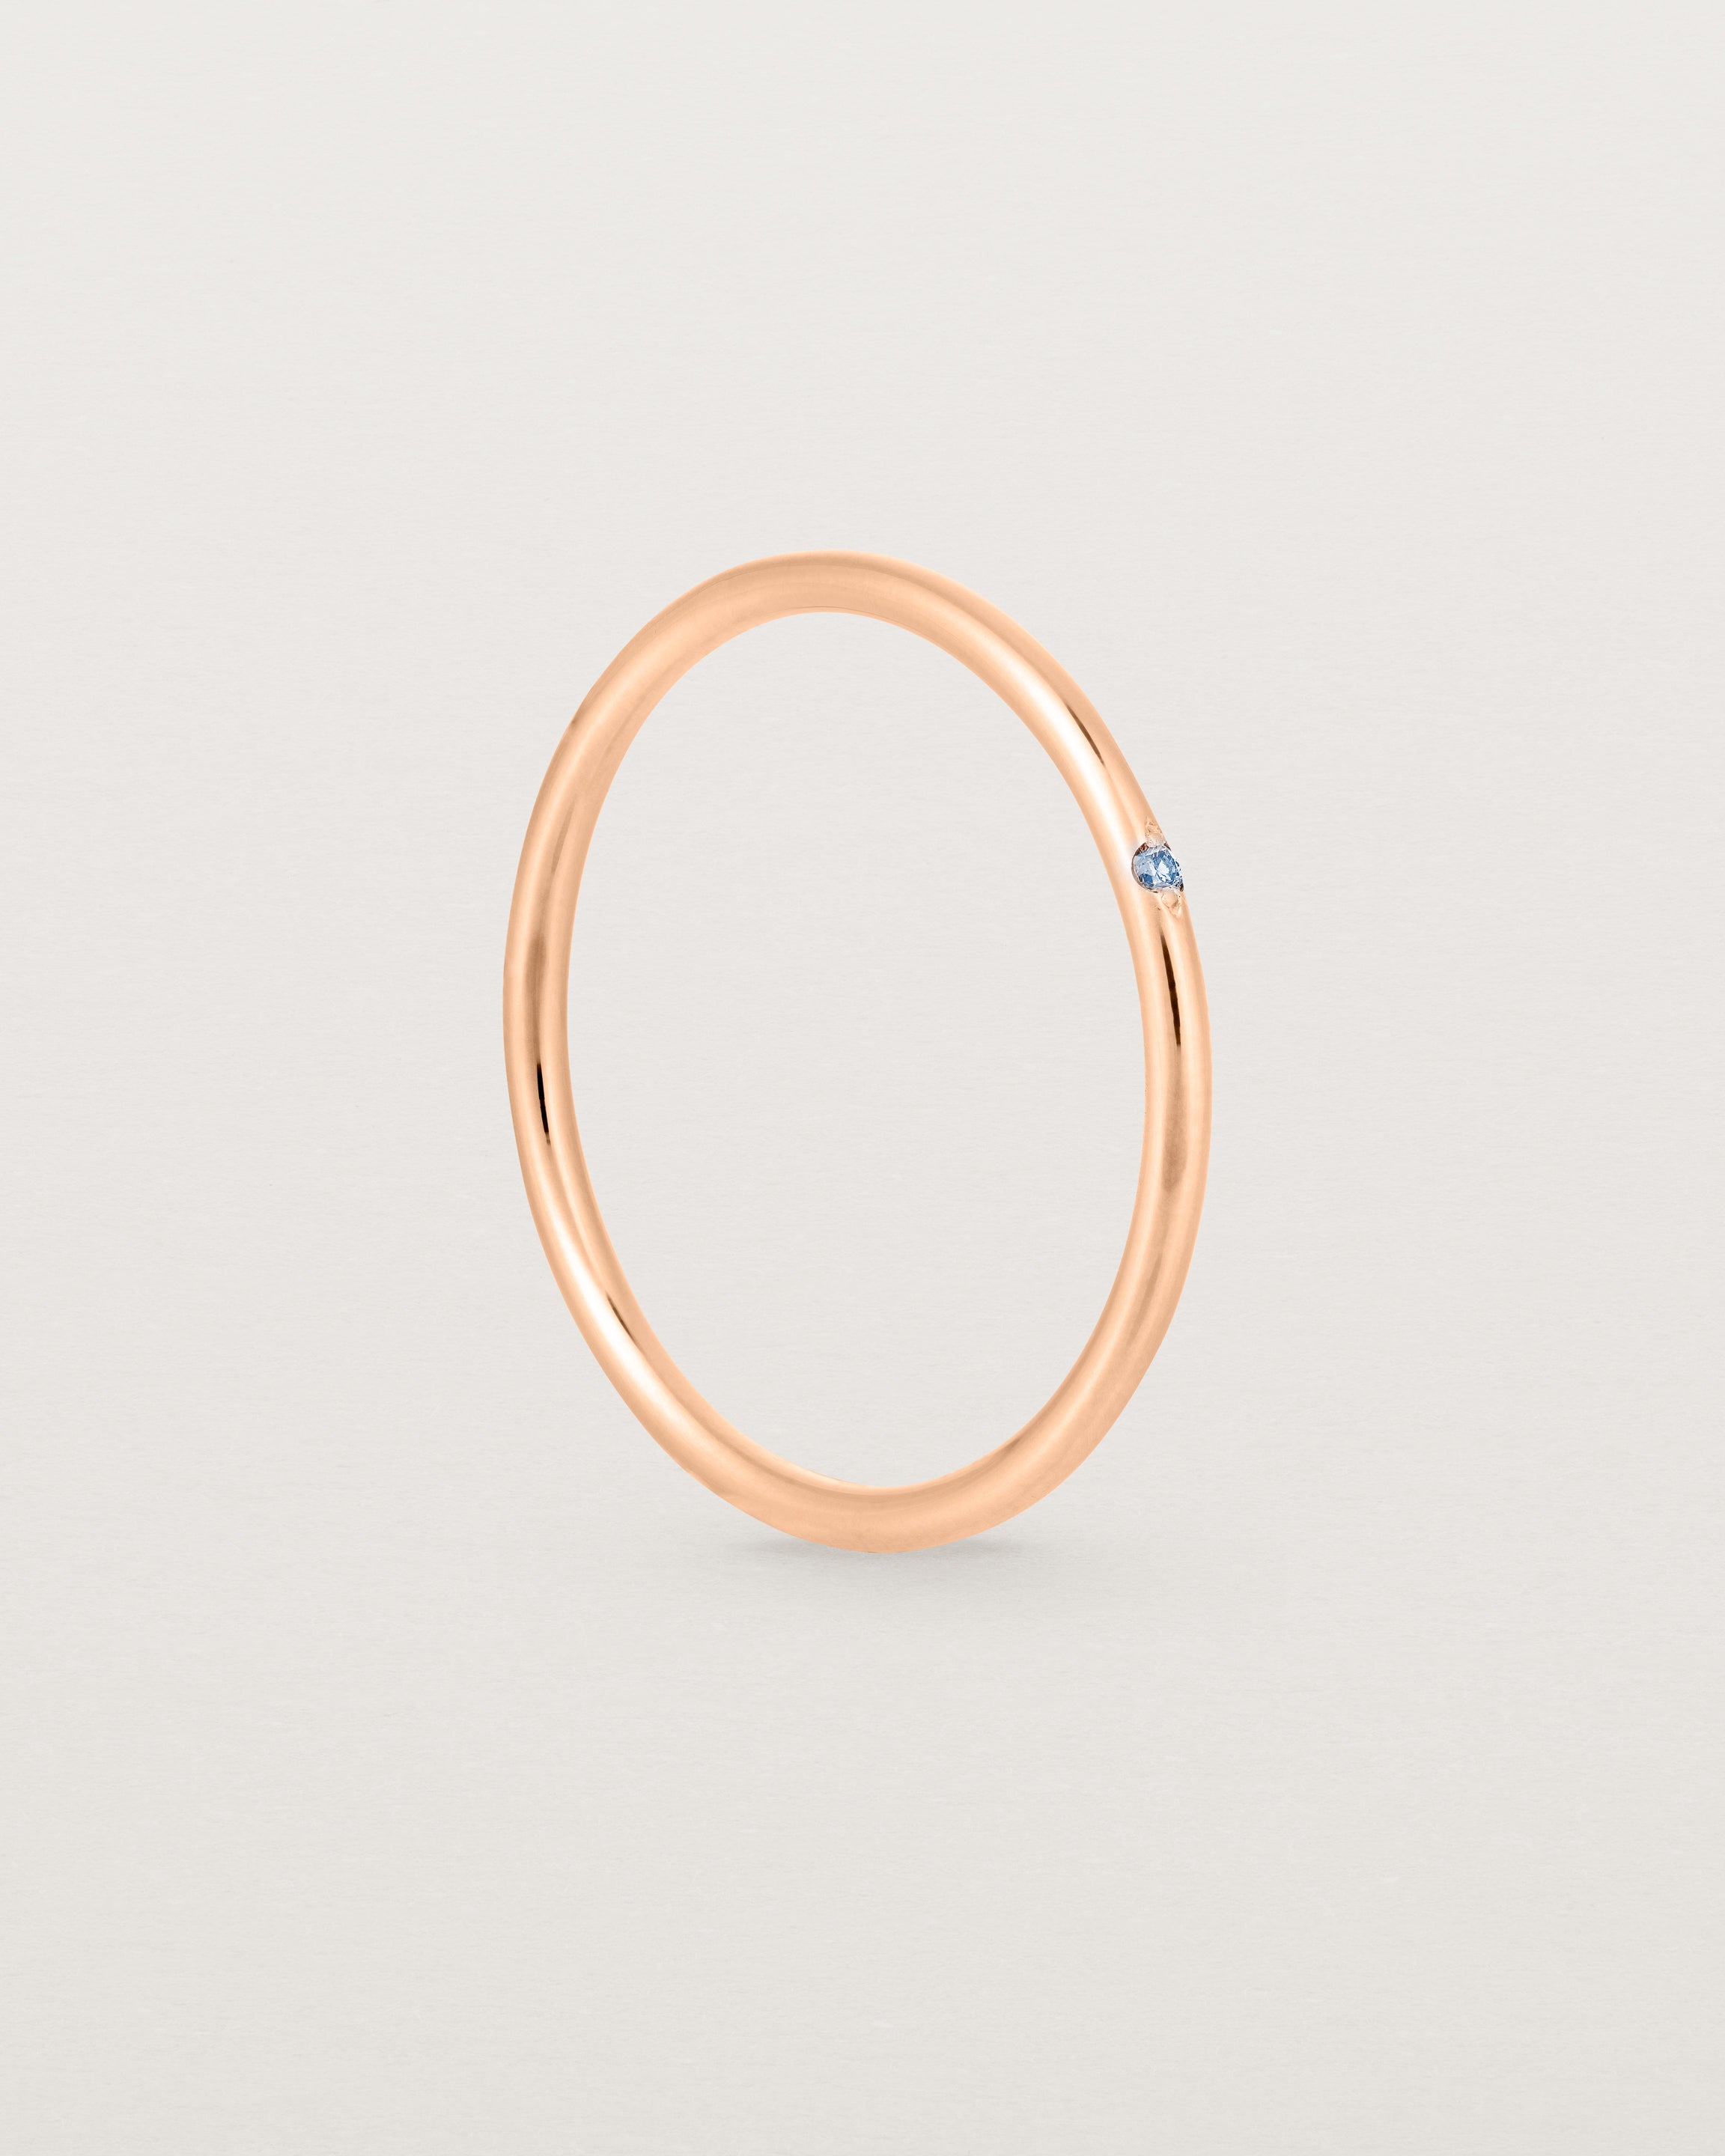 Standing view of the Promise Ring | Birthstone in Rose Gold.